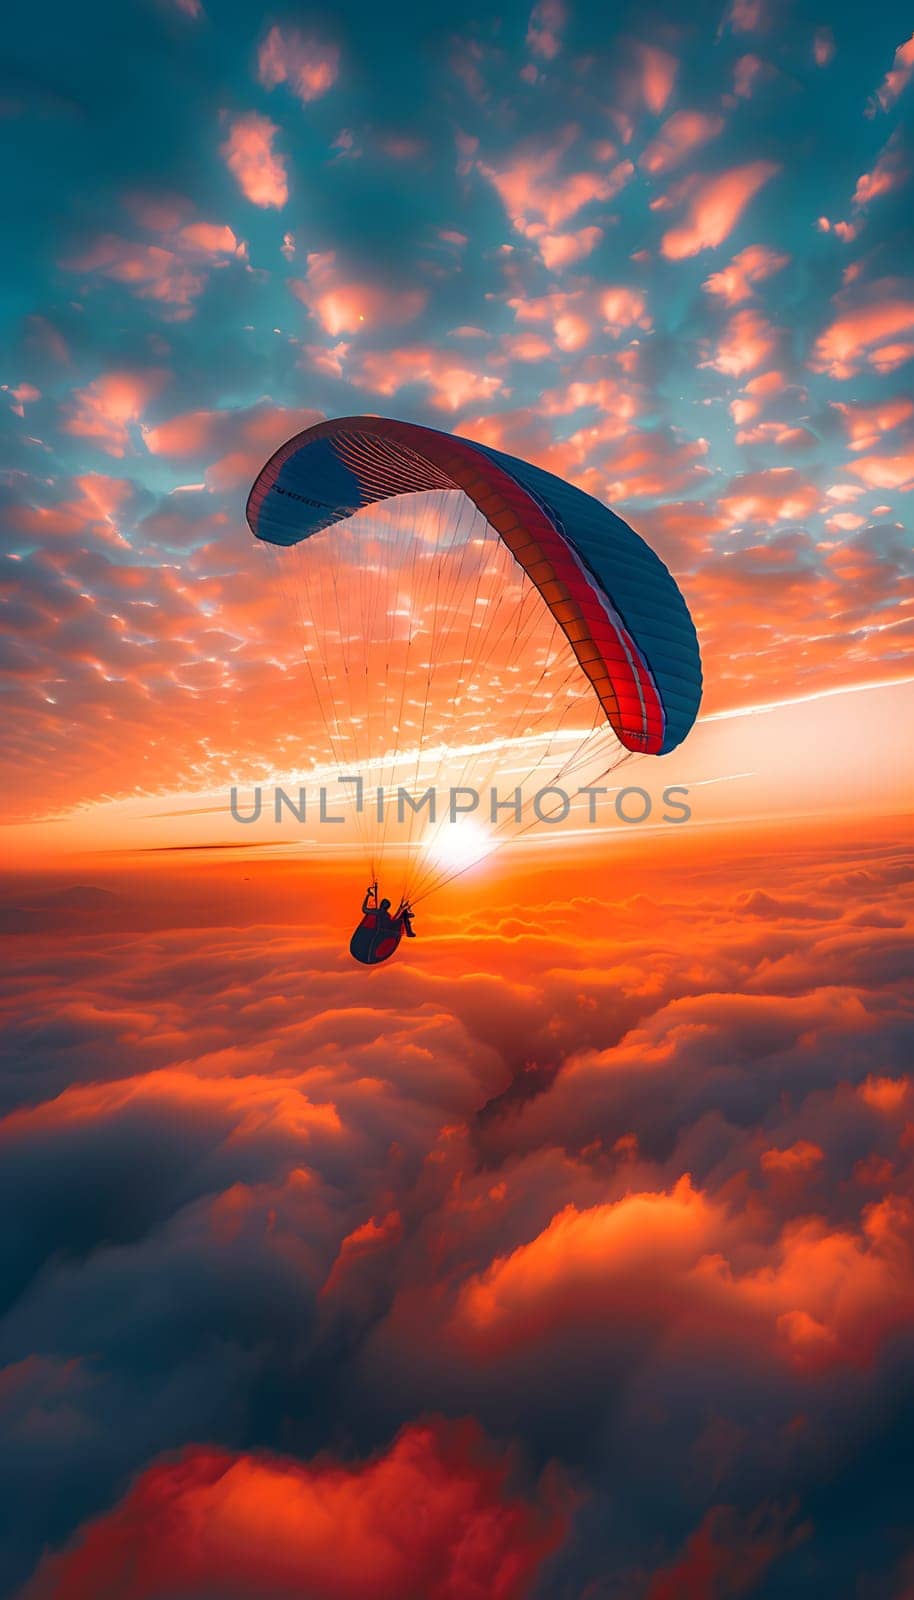 Parachuting at dusk over orange clouds, with afterglow on horizon by Nadtochiy